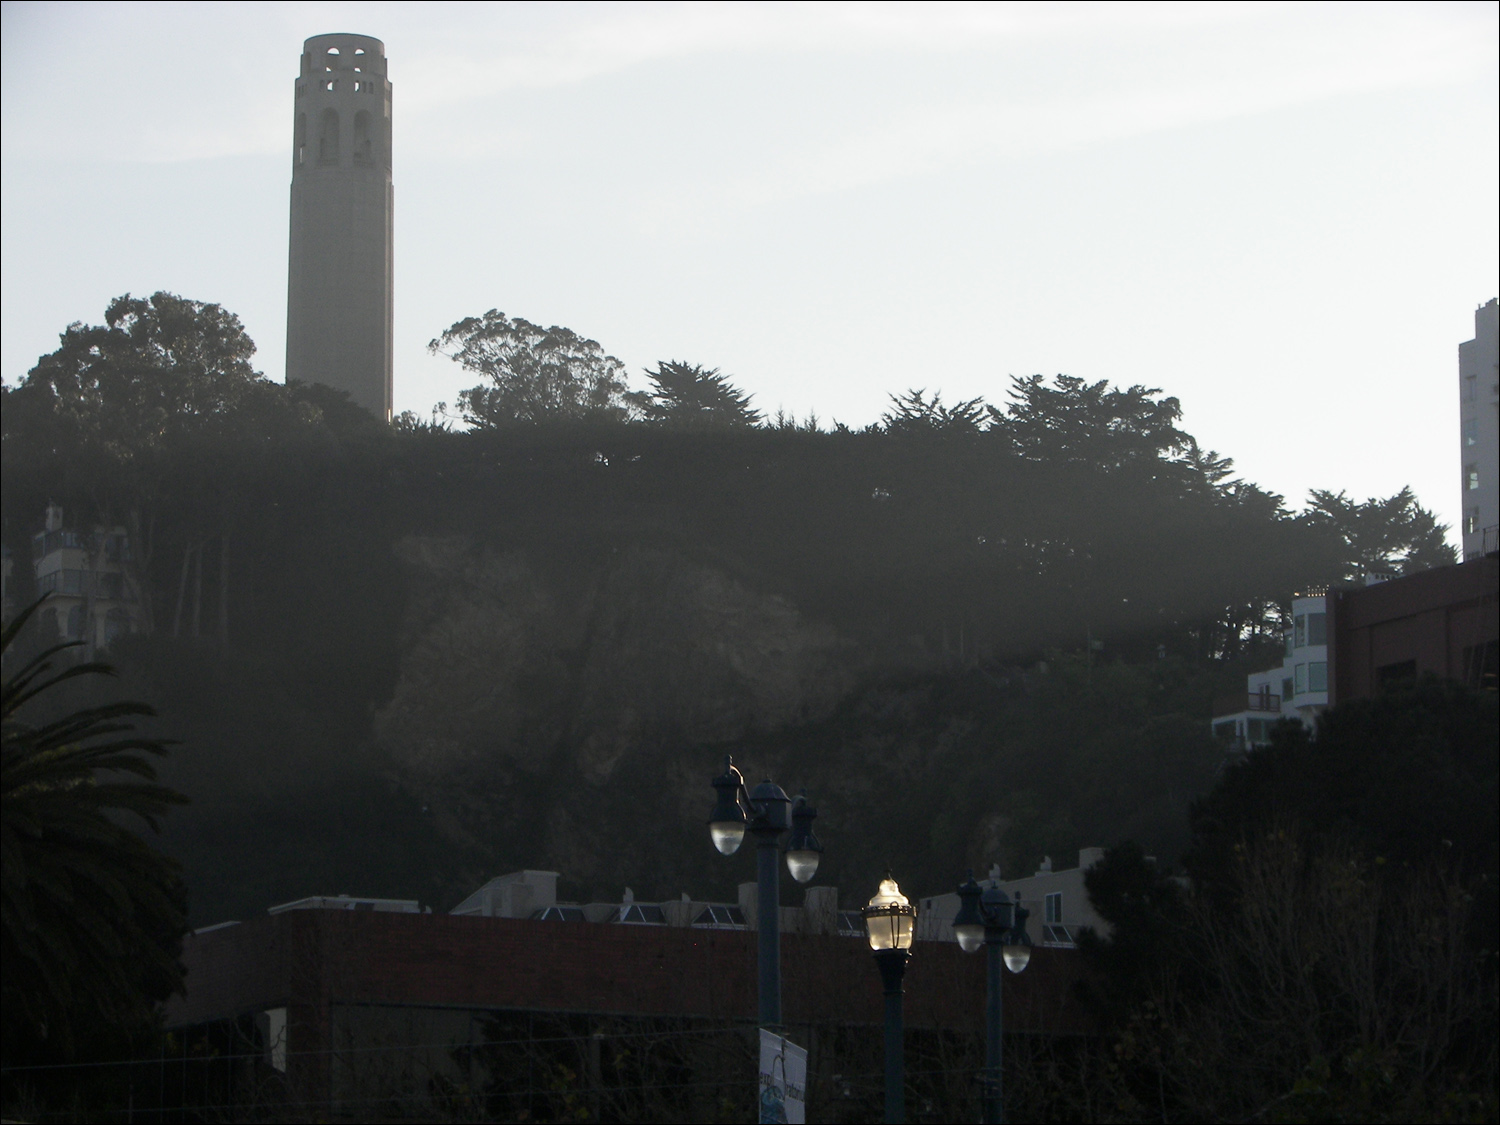 Return ferry trip-  View of Coit tower